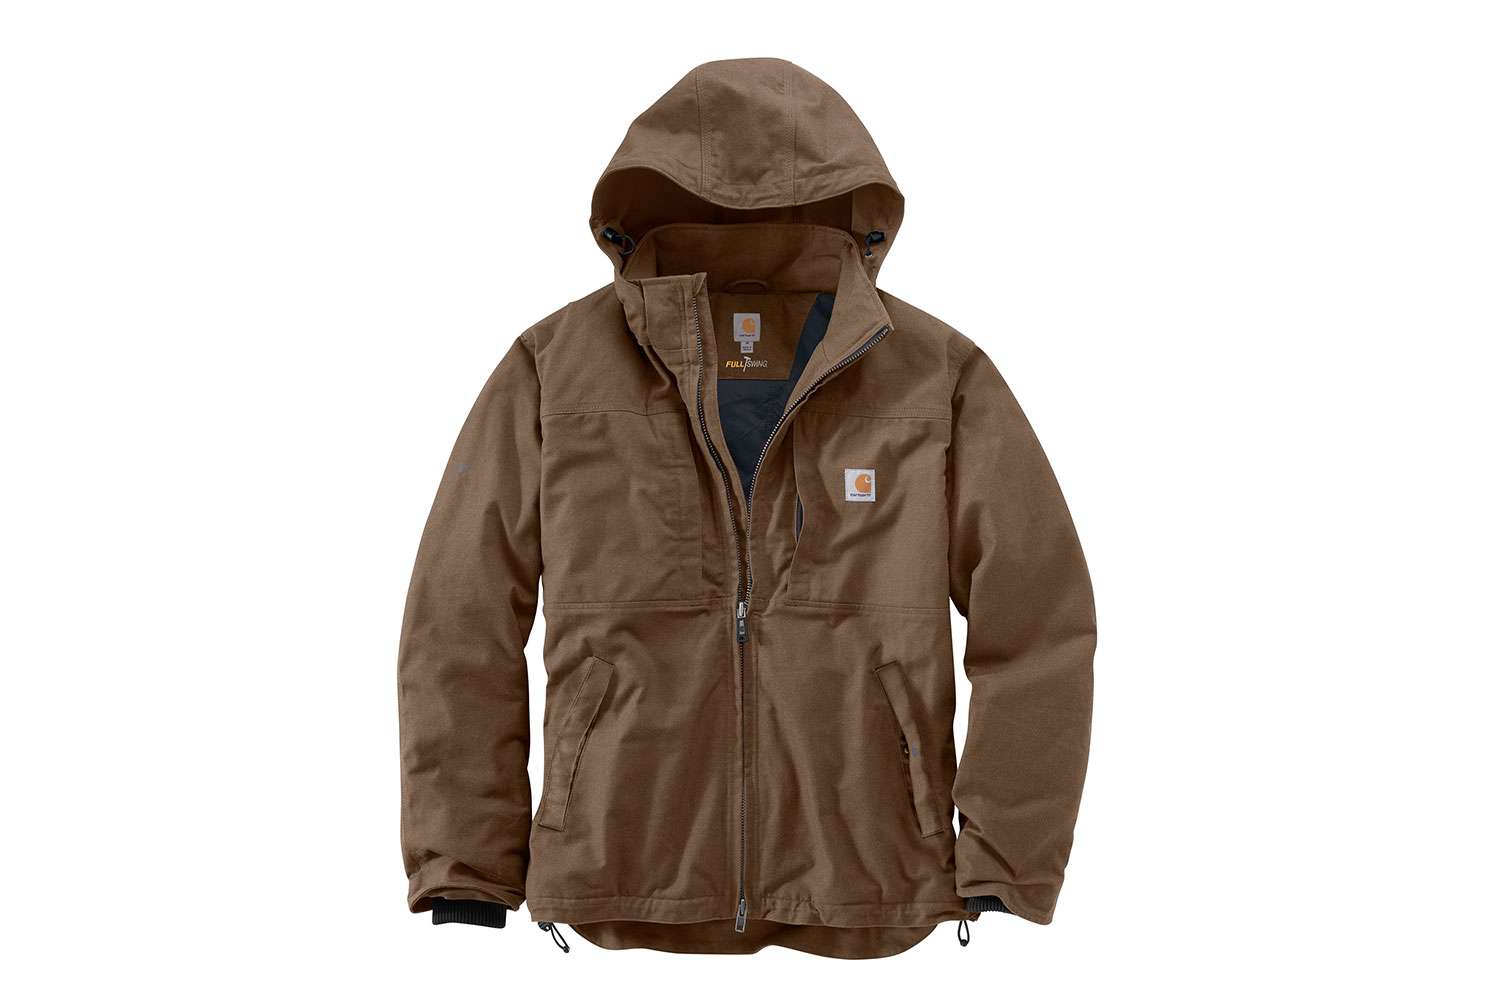 <p><b>Carhartt Full Swing Cryder Jacket, $149.99-$159.99</b></p> The jacket weighs 8 1/4-ounce, 59 percent cotton/39 percent polyester/2 percent spandex Quick Duck with Rain Defender durable water repellent. 30 percent lighter but ounce-for-ounce as durable as sandstone. Rugged Flex durable stretch technology for ease of movement. Mighty Back bi-swing between shoulders for instant recovery. Flex Elbow for less restriction. Freedom Gusset under arm. Plus so much more.<br> <a href=